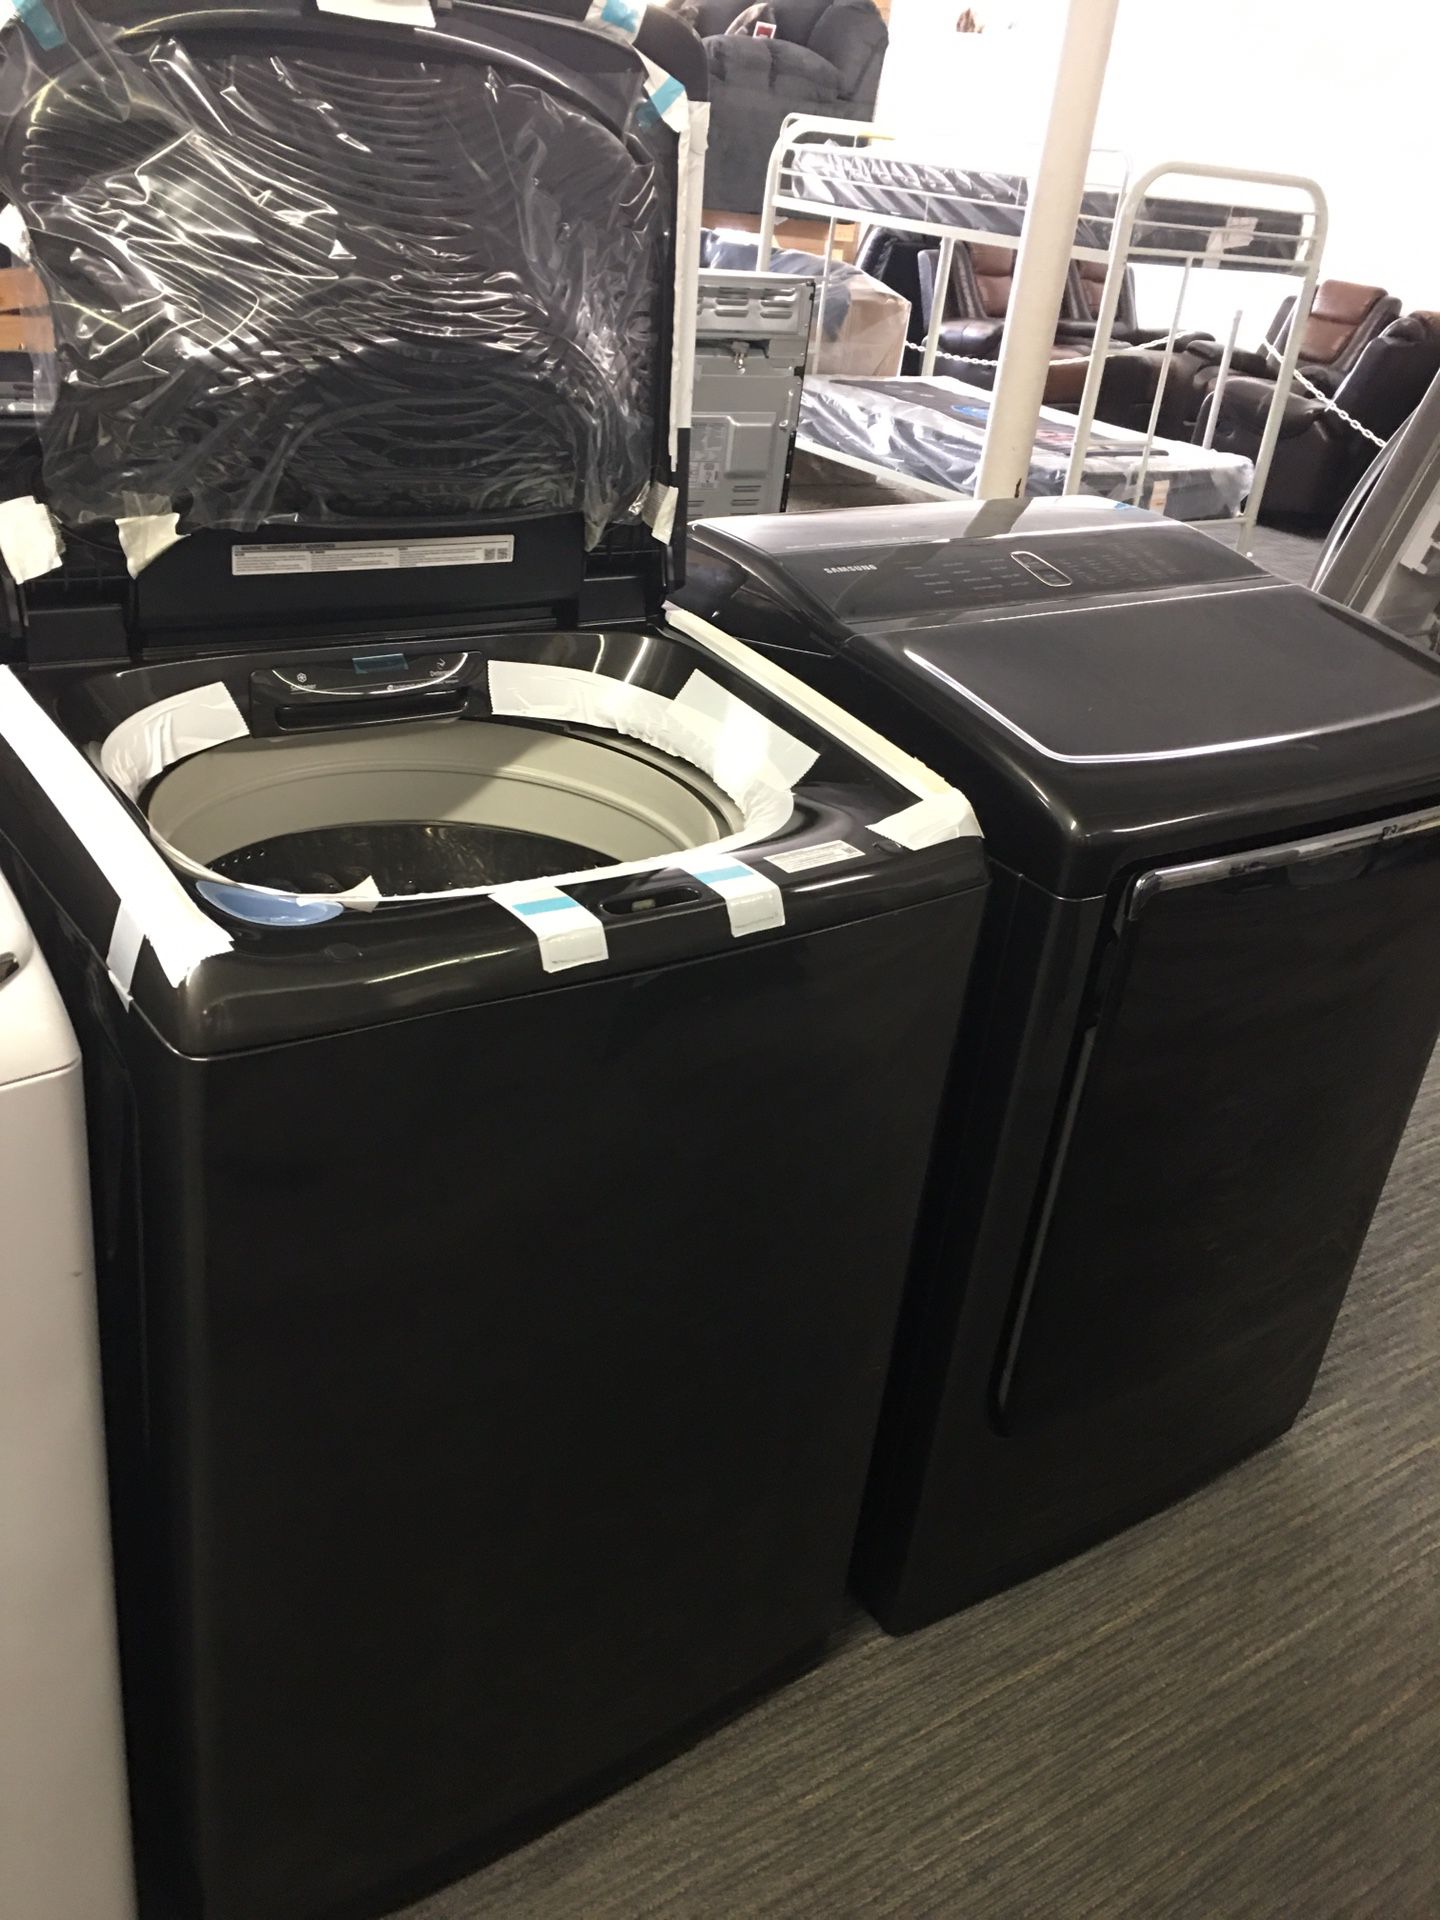 Samsung Brand New Washer And Dye King Size Capacity With Warranty Scraches Dent No Credit Needed Just $39 Down payment Cash price $1,800